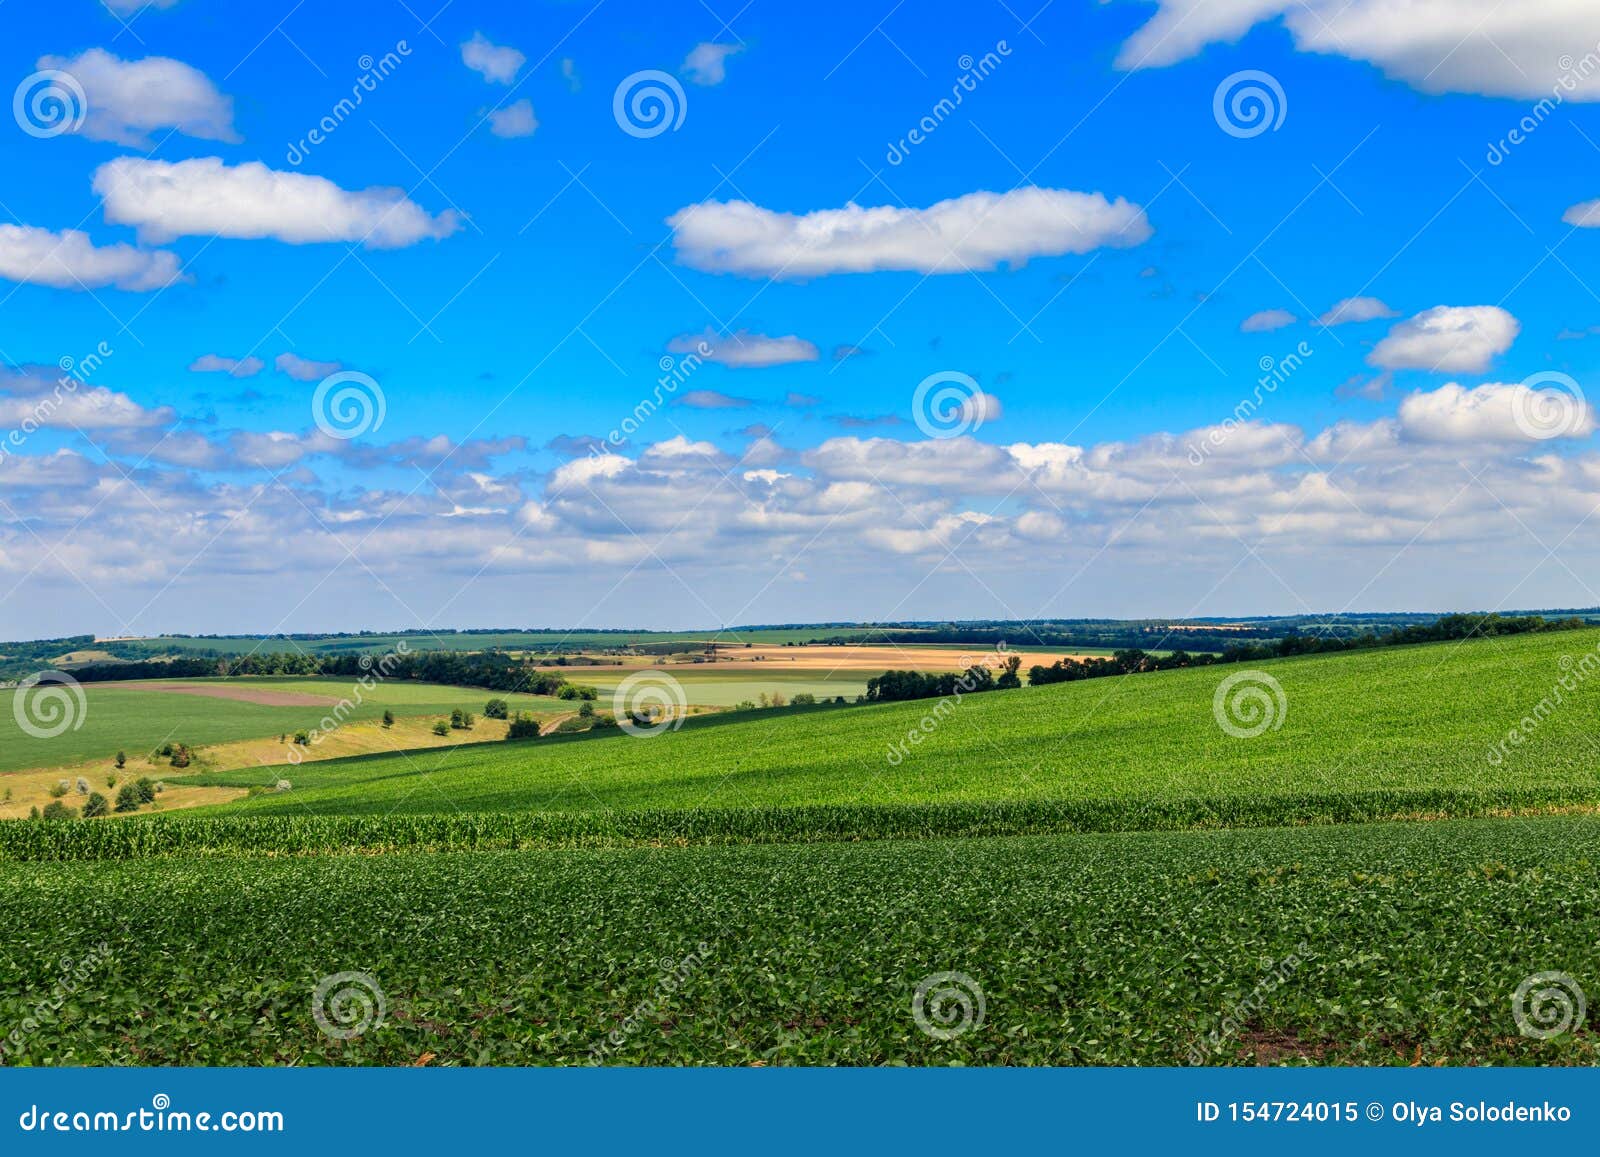 Summer Landscape with Green Fields, Hills and Blue Sky Stock Image ...